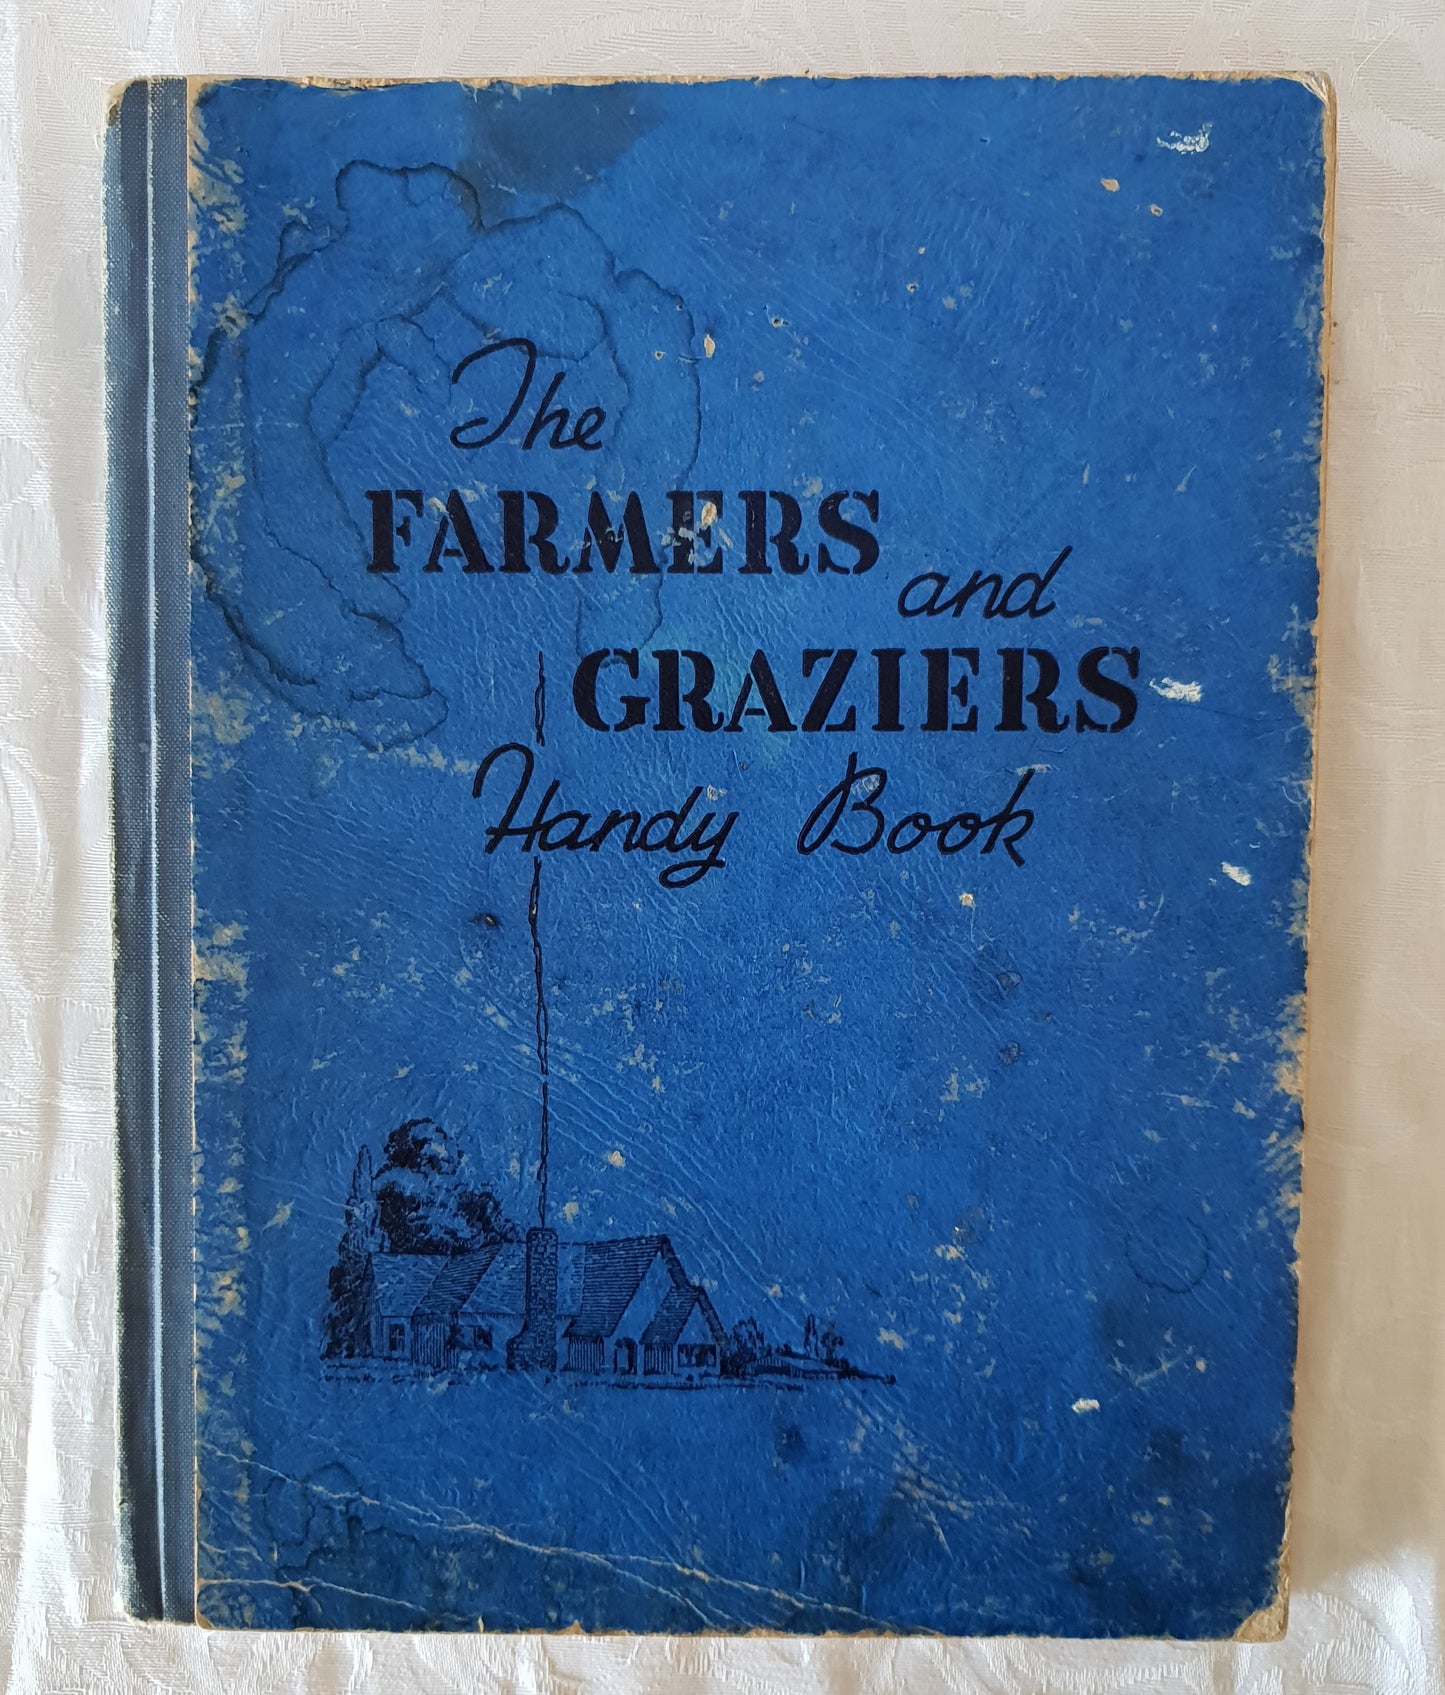 The Farmers and Graziers Handy Book Volume 1 Compiled by J. V. Bartlett